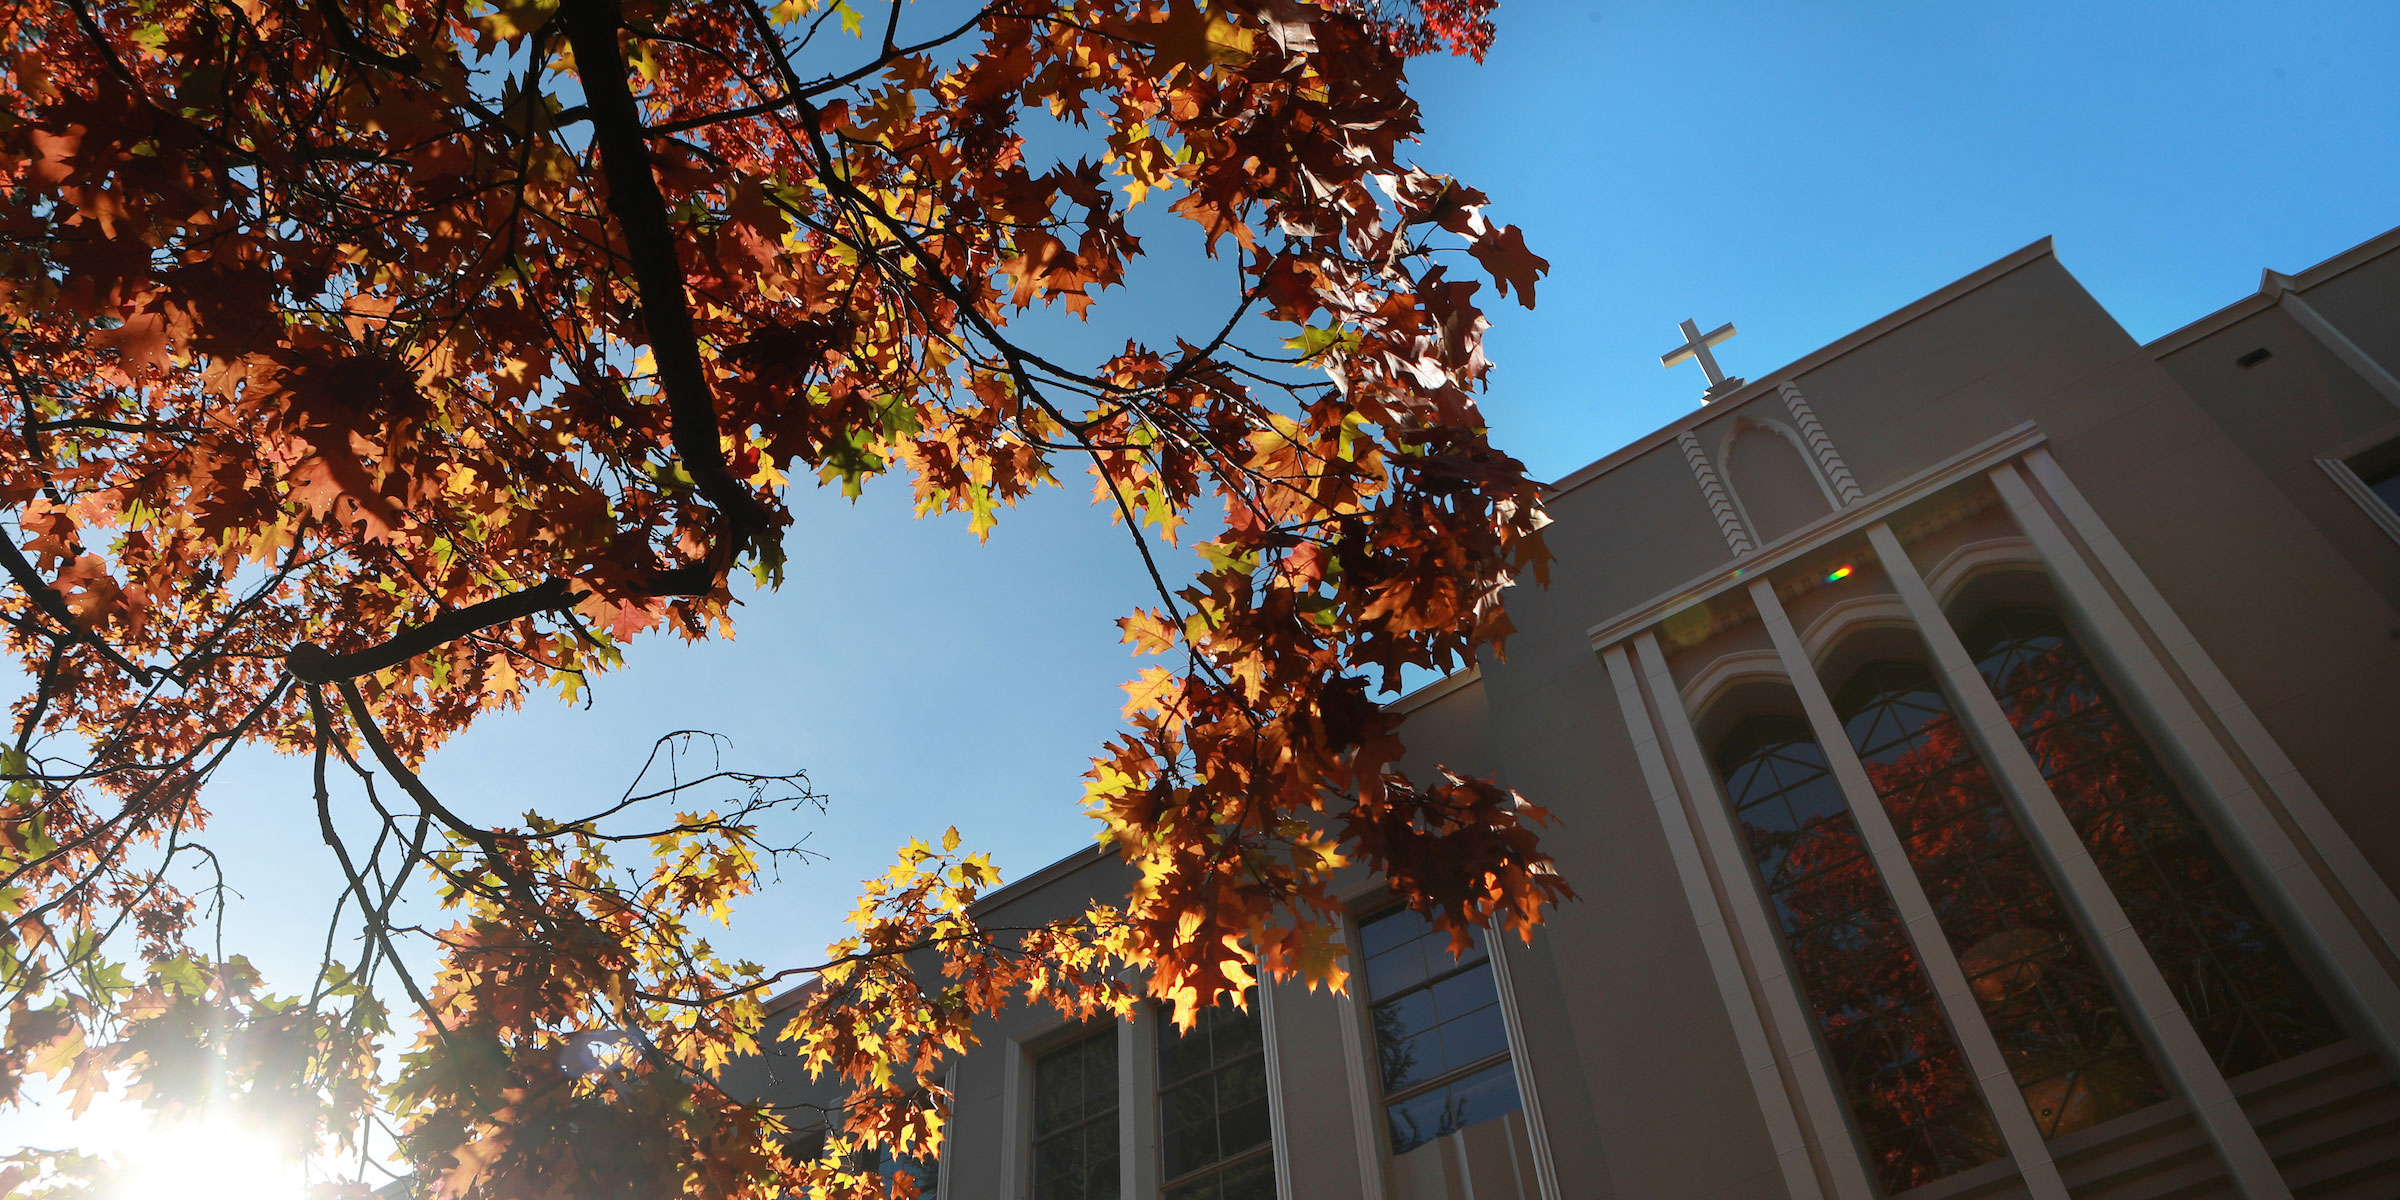 looking upwards at the entrance to the Administration building and colorful fall trees